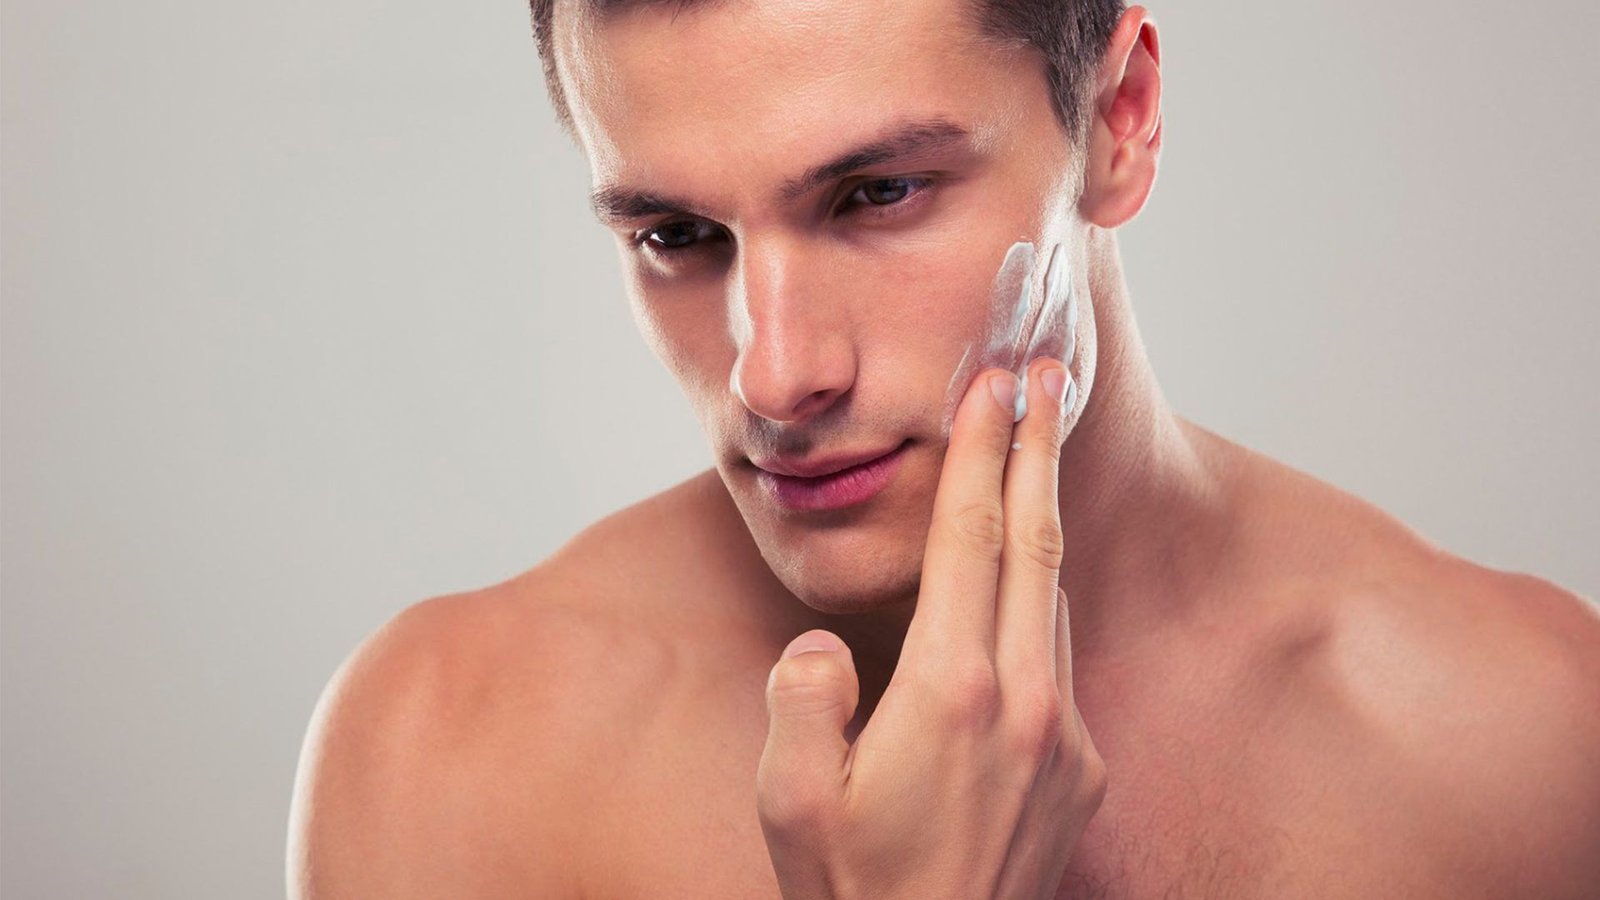 Skincare Tips For Men: Why Everyone Should Have a Skincare Routine